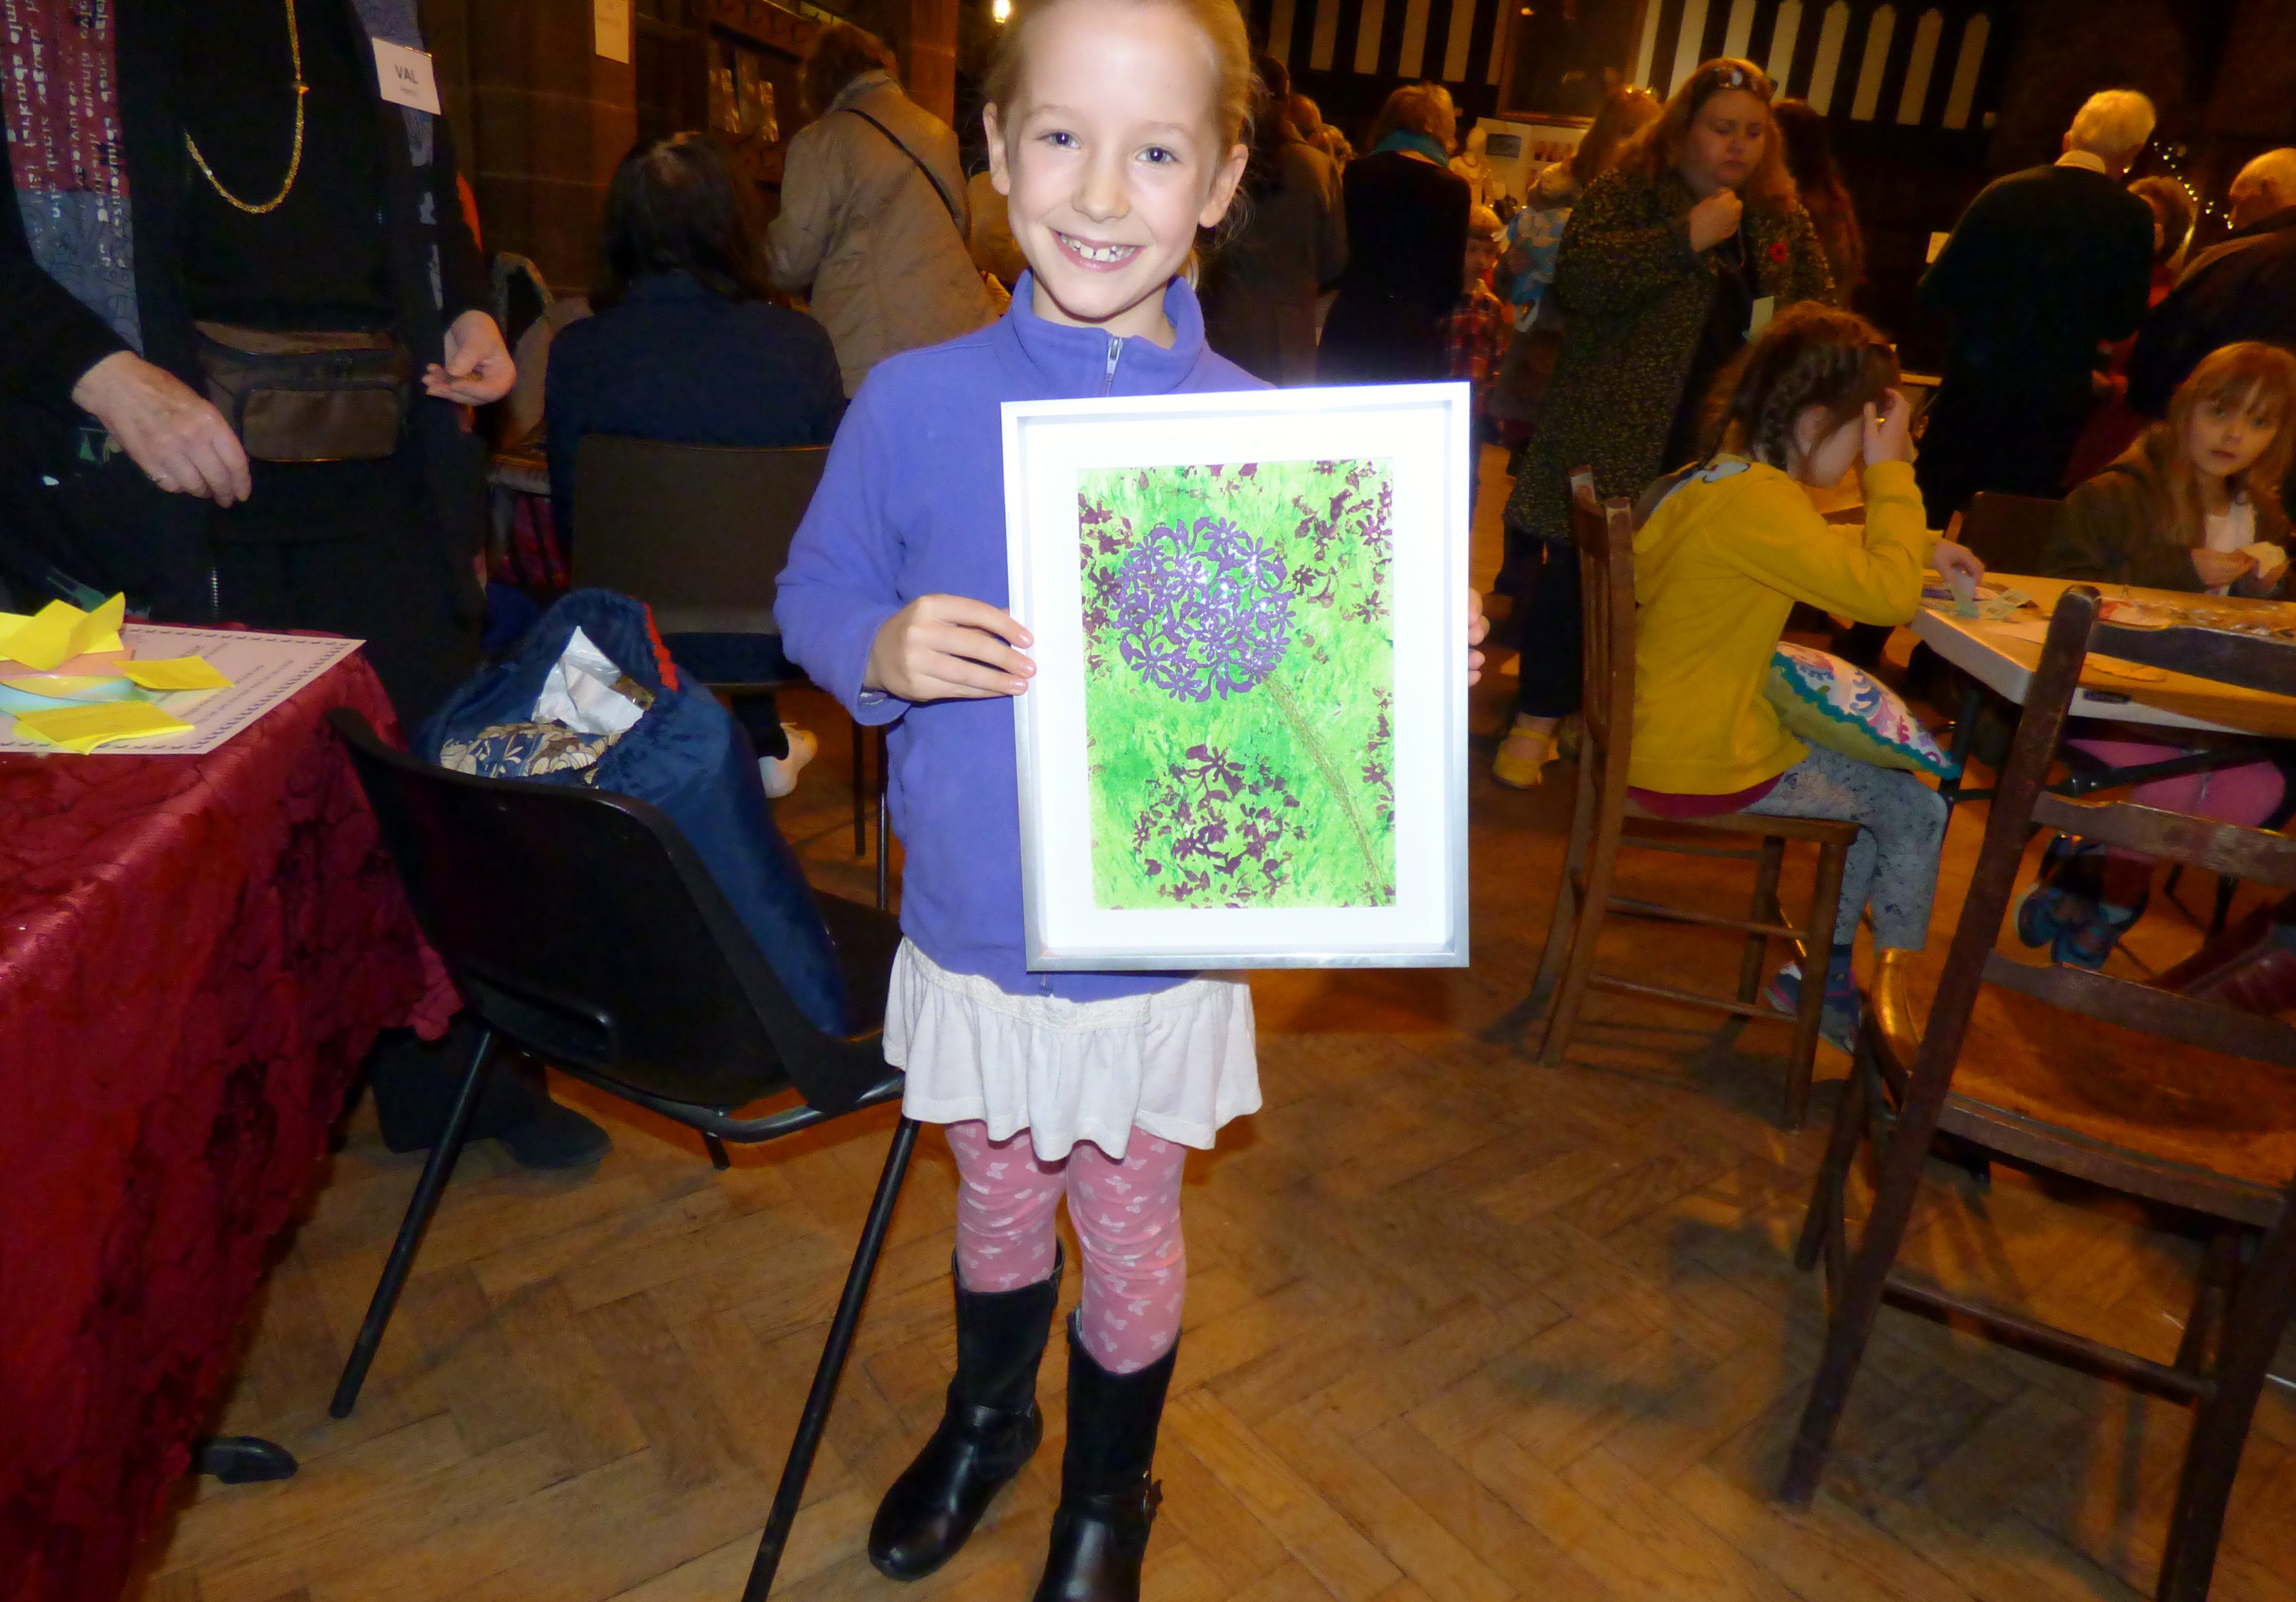 Esther Lewis with her winning entry to YE competition at MEG Winter Fair 2016